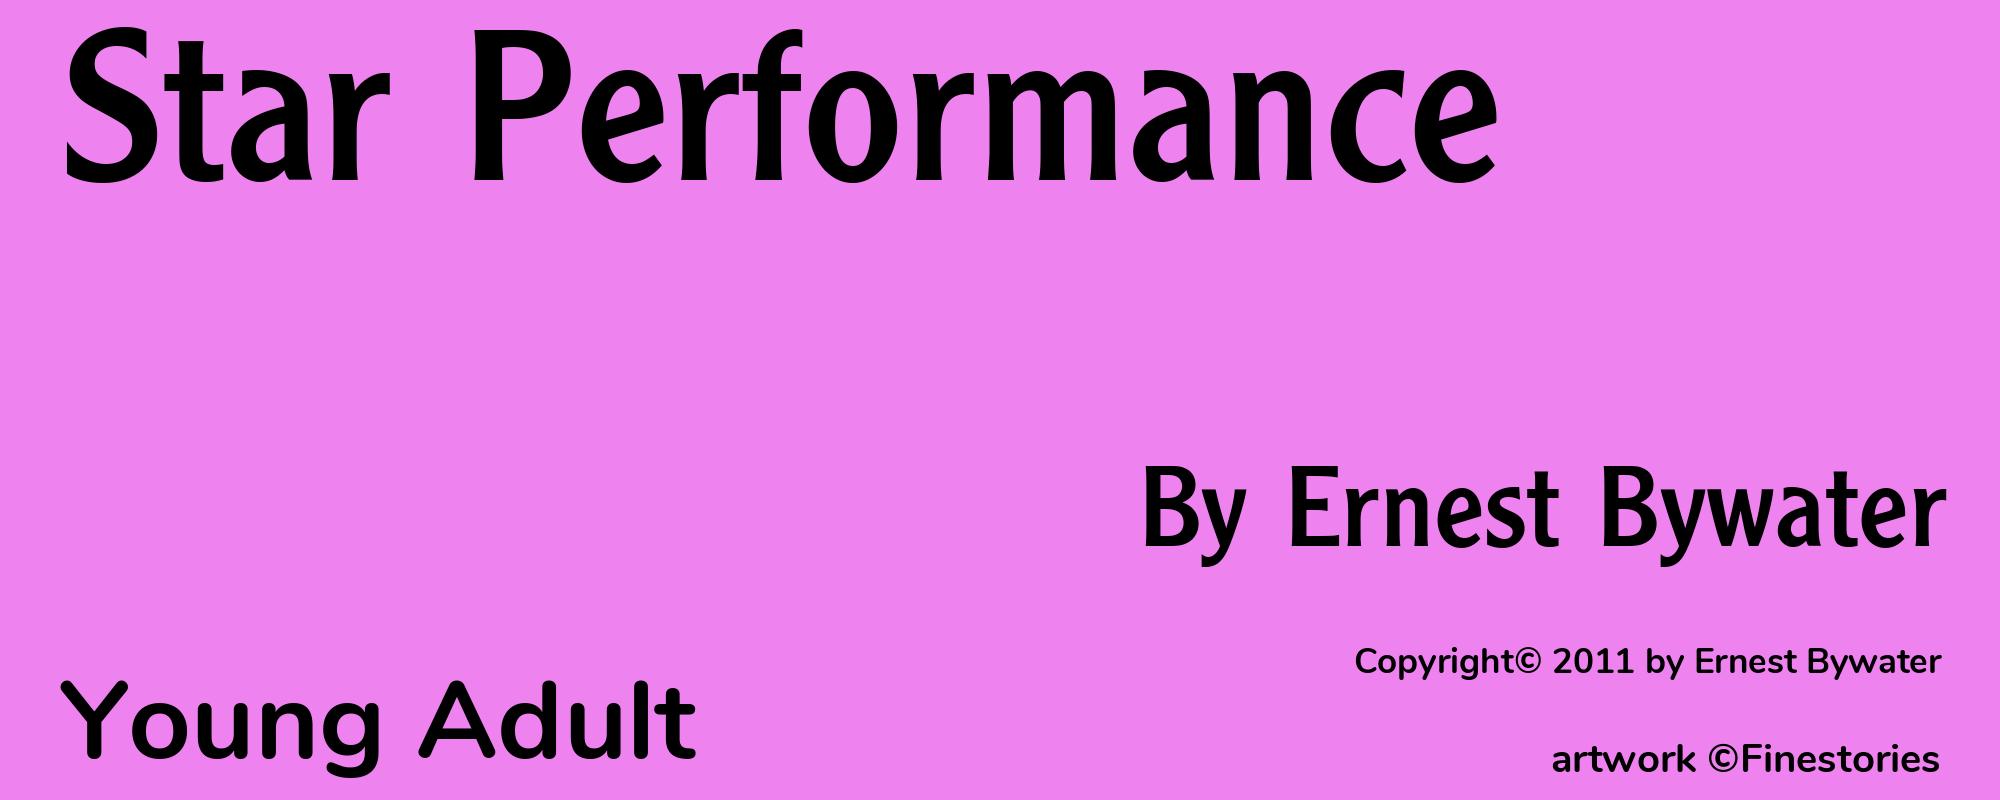 Star Performance - Cover